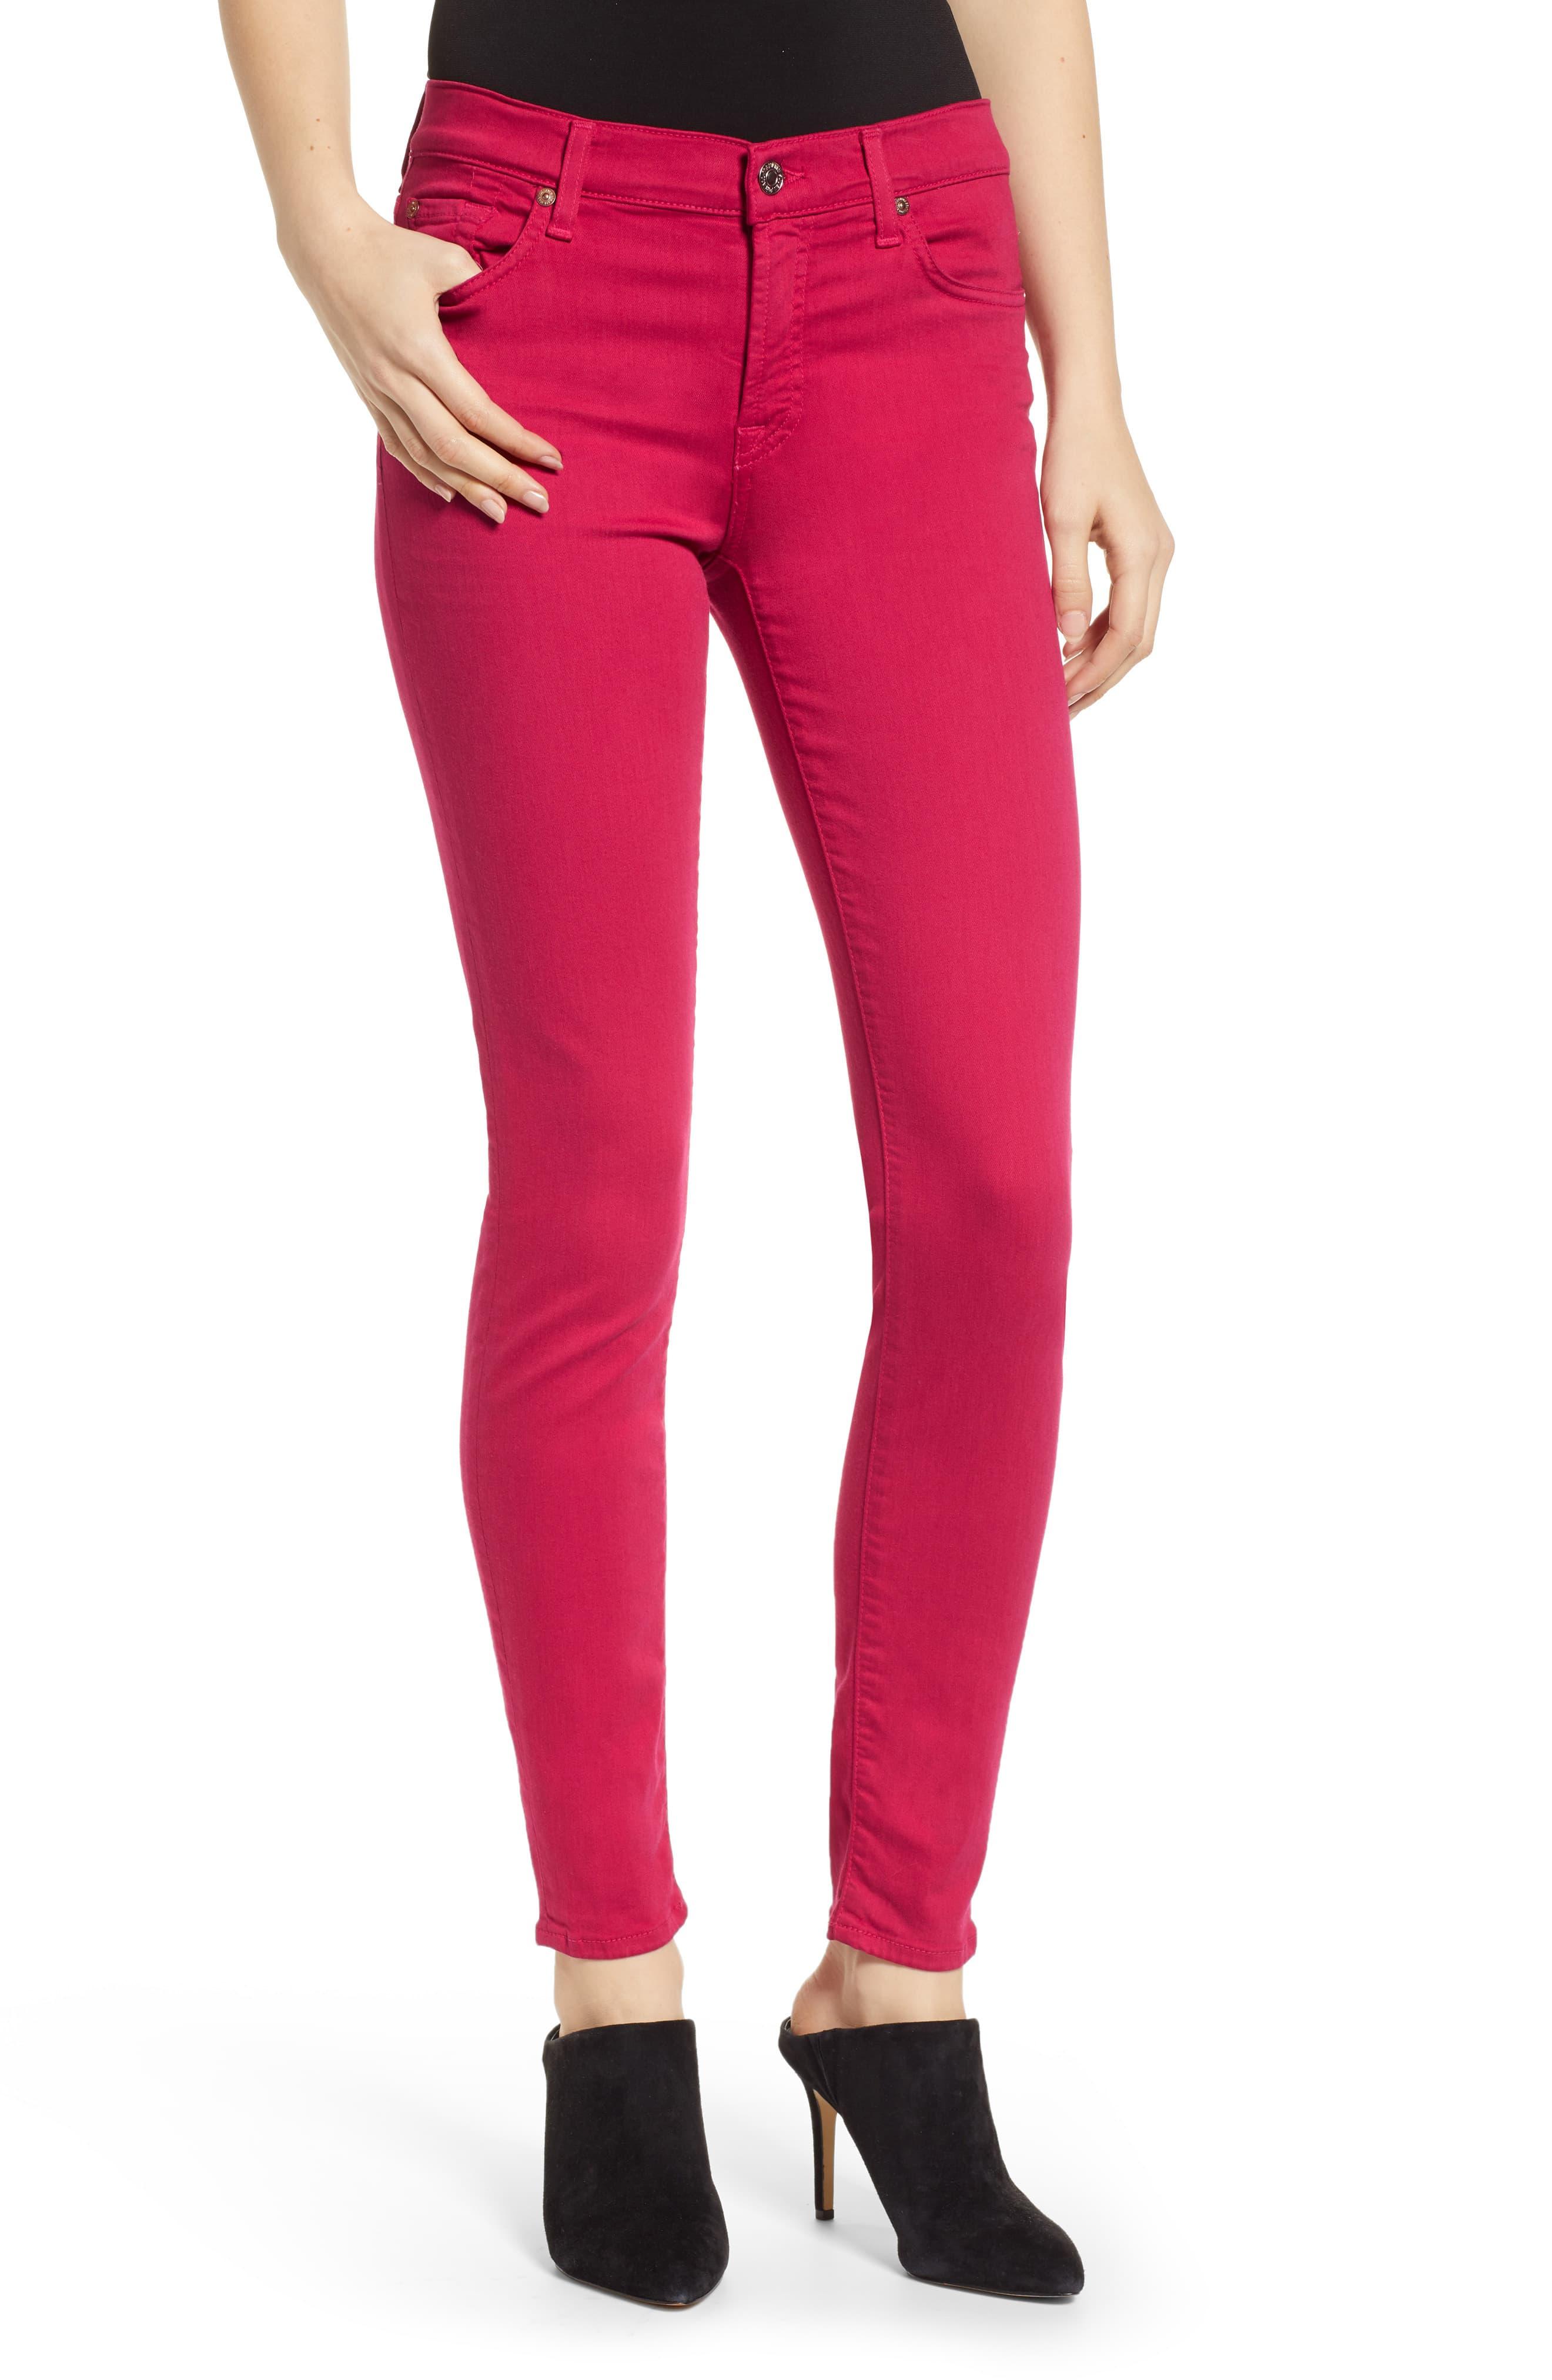 7 For All Mankind 7 For All Mankind The Ankle Skinny Jeans in Pink - Lyst